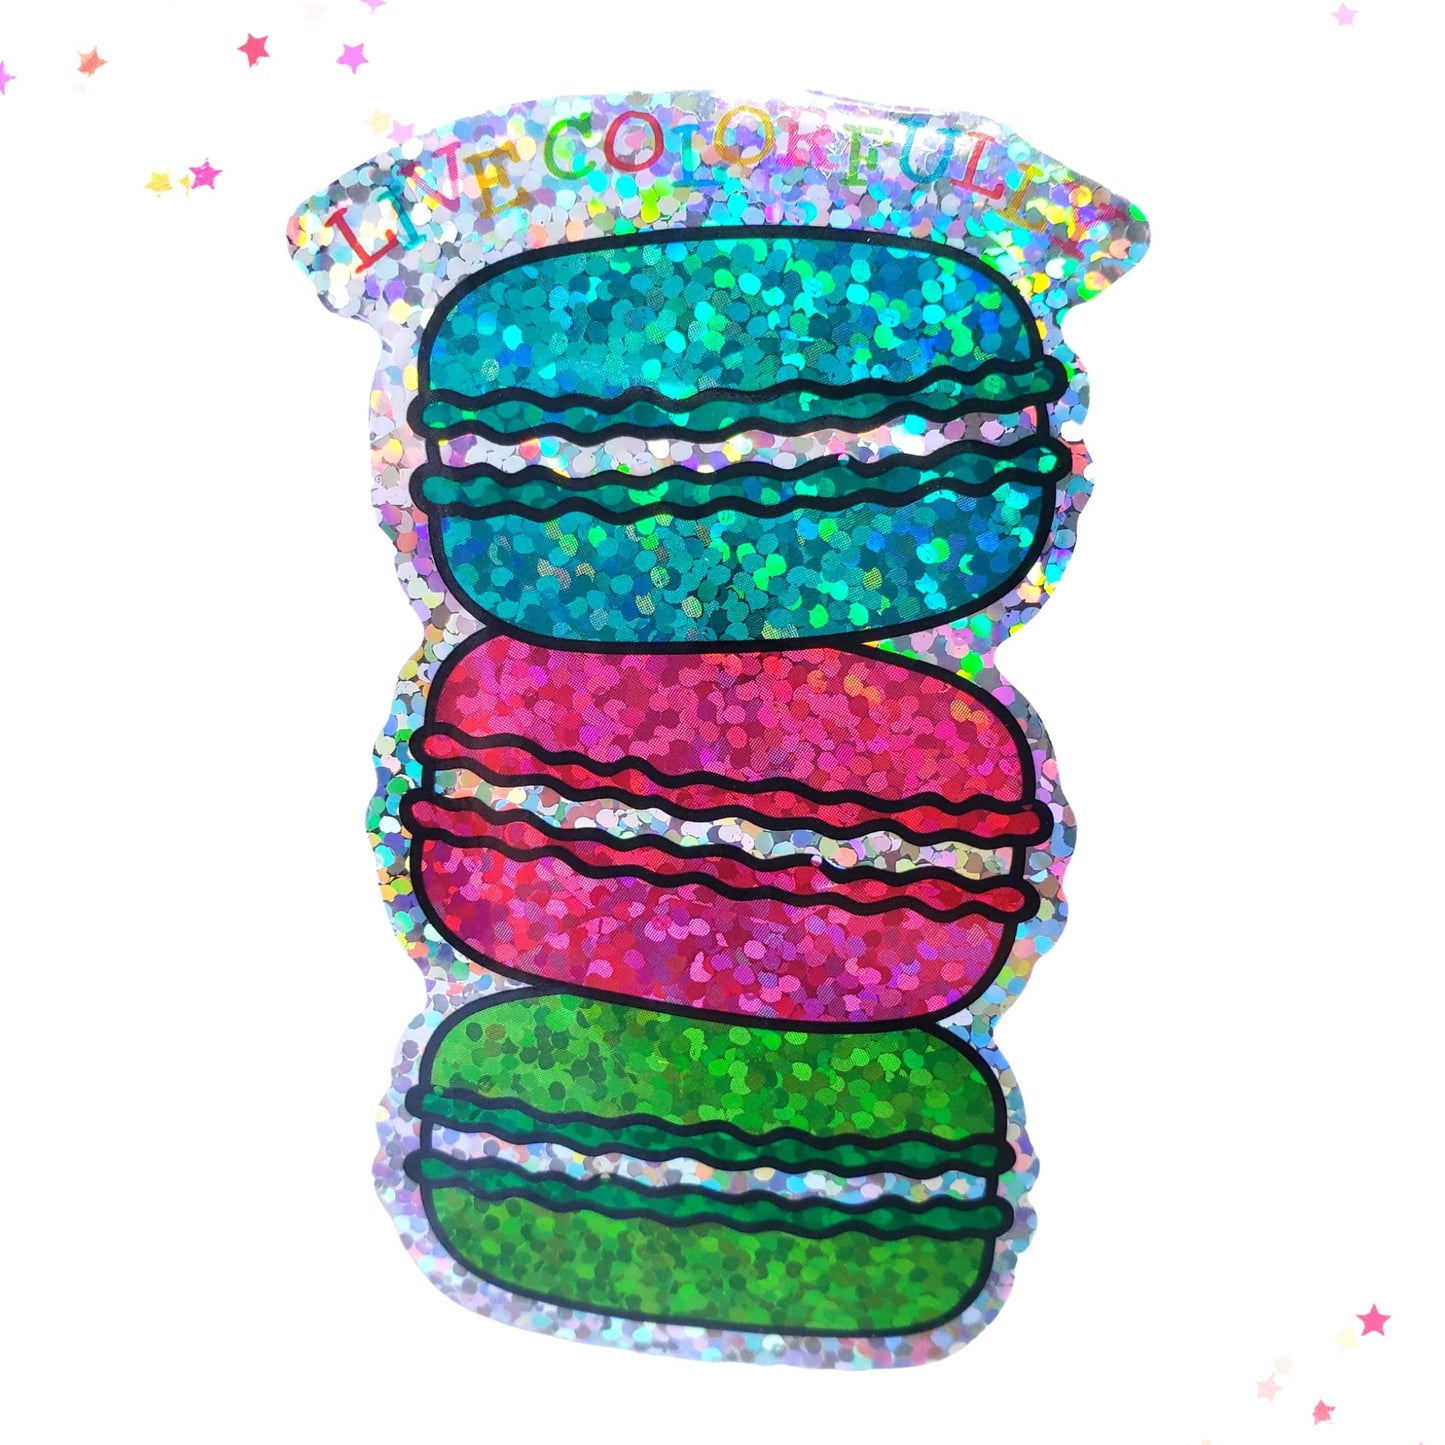 Premium Sticker - Sparkly Holographic Glitter Live Colorfully Macarons from Confetti Kitty, Only 2.00